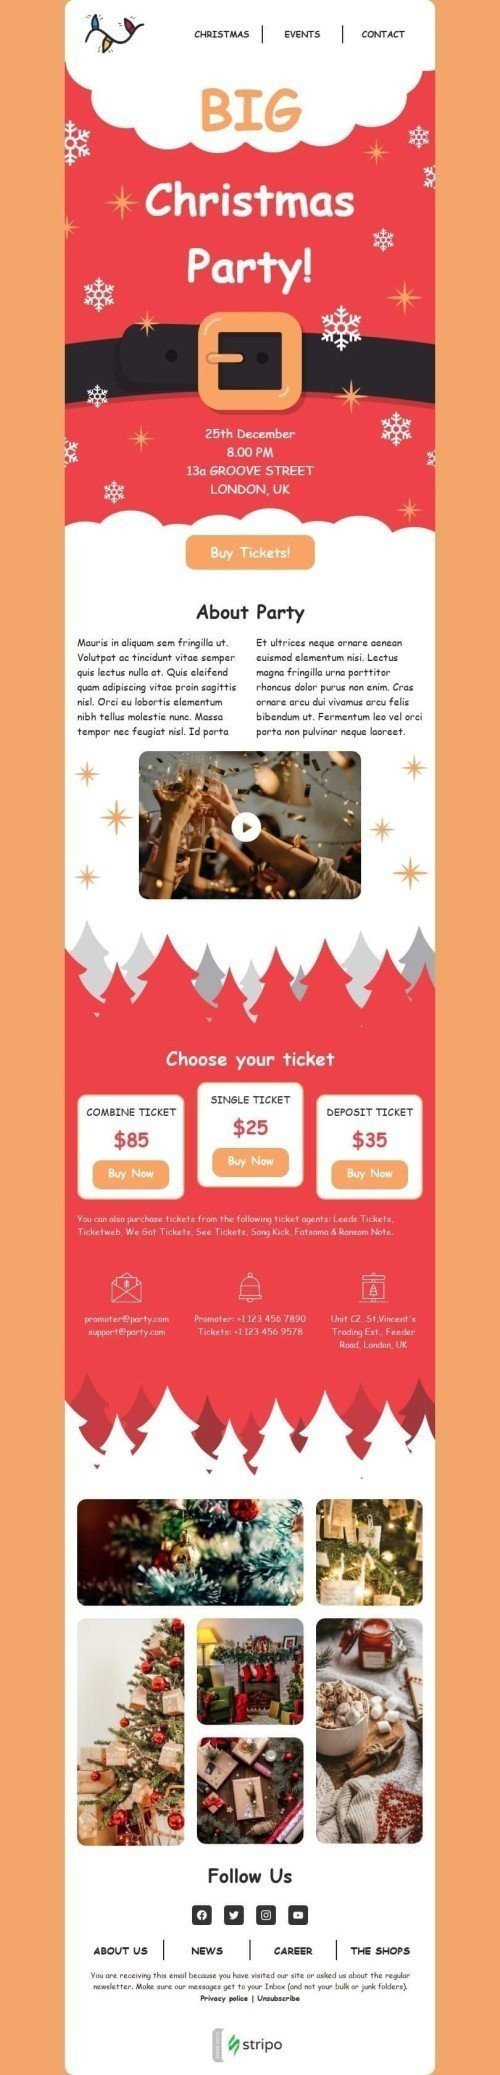 Christmas Email Template "Big Christmas Party" for Events industry mobile view